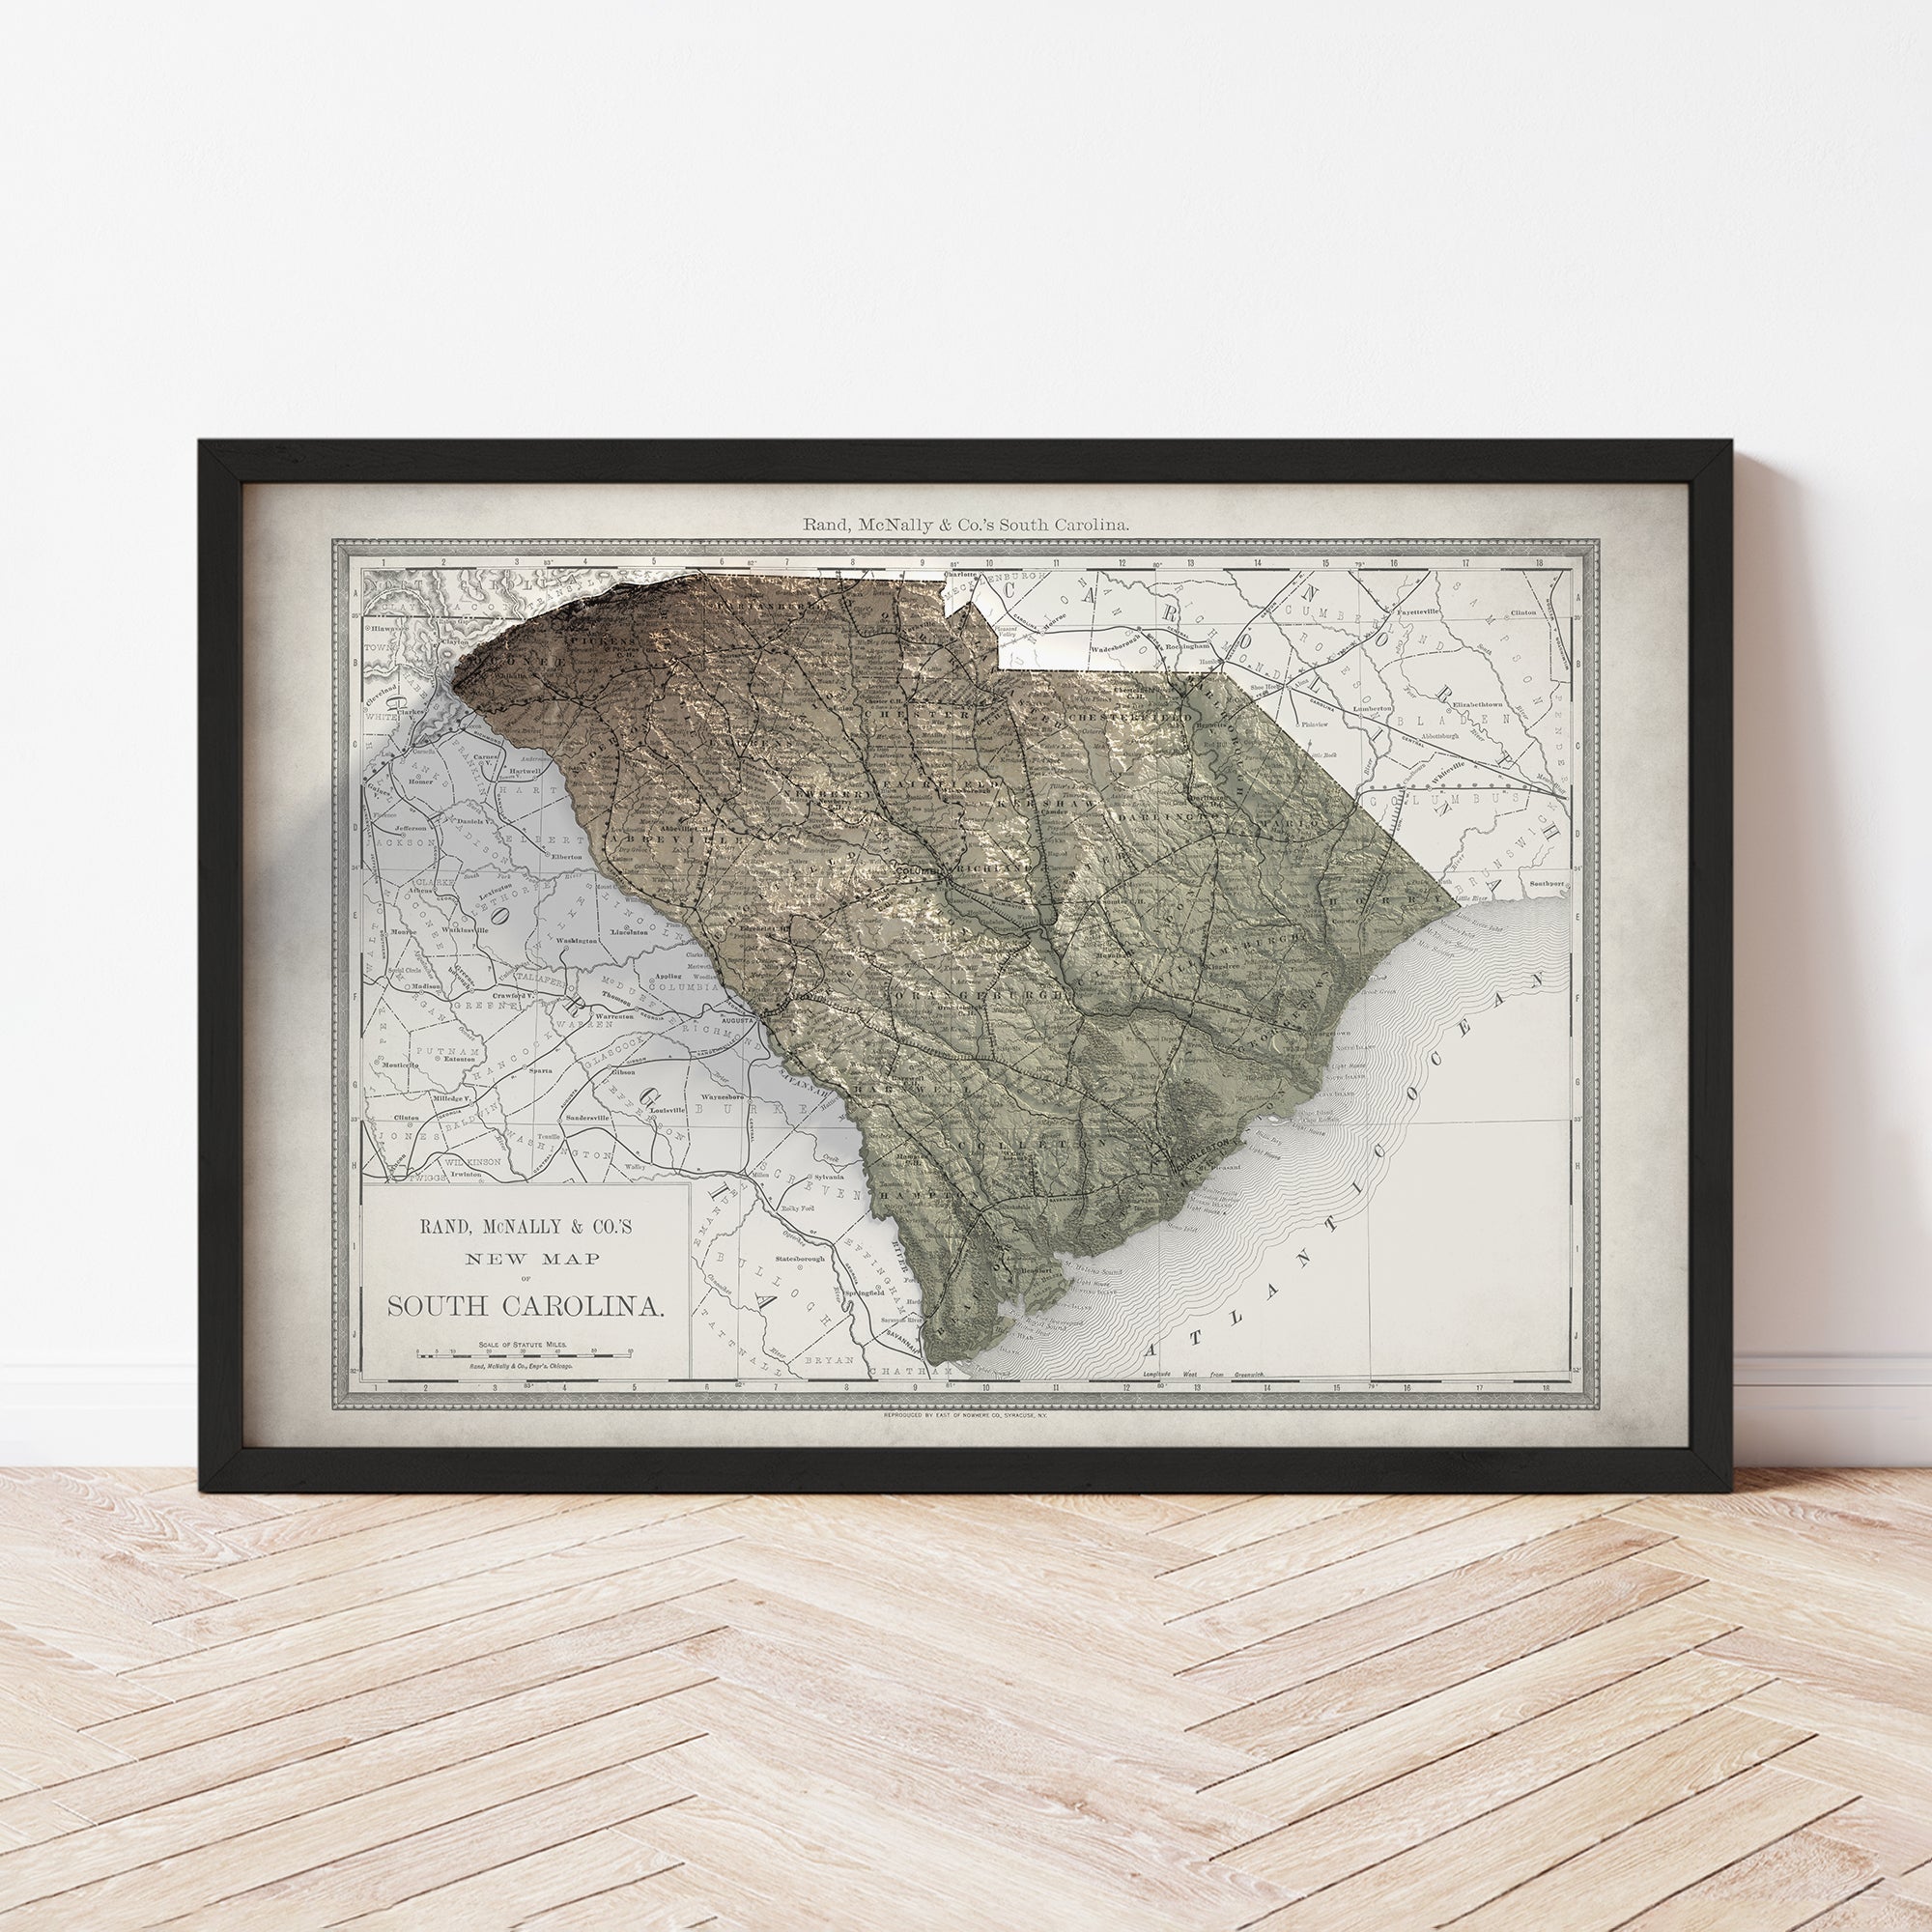 South Carolina - Vintage Shaded Relief Map (1889)